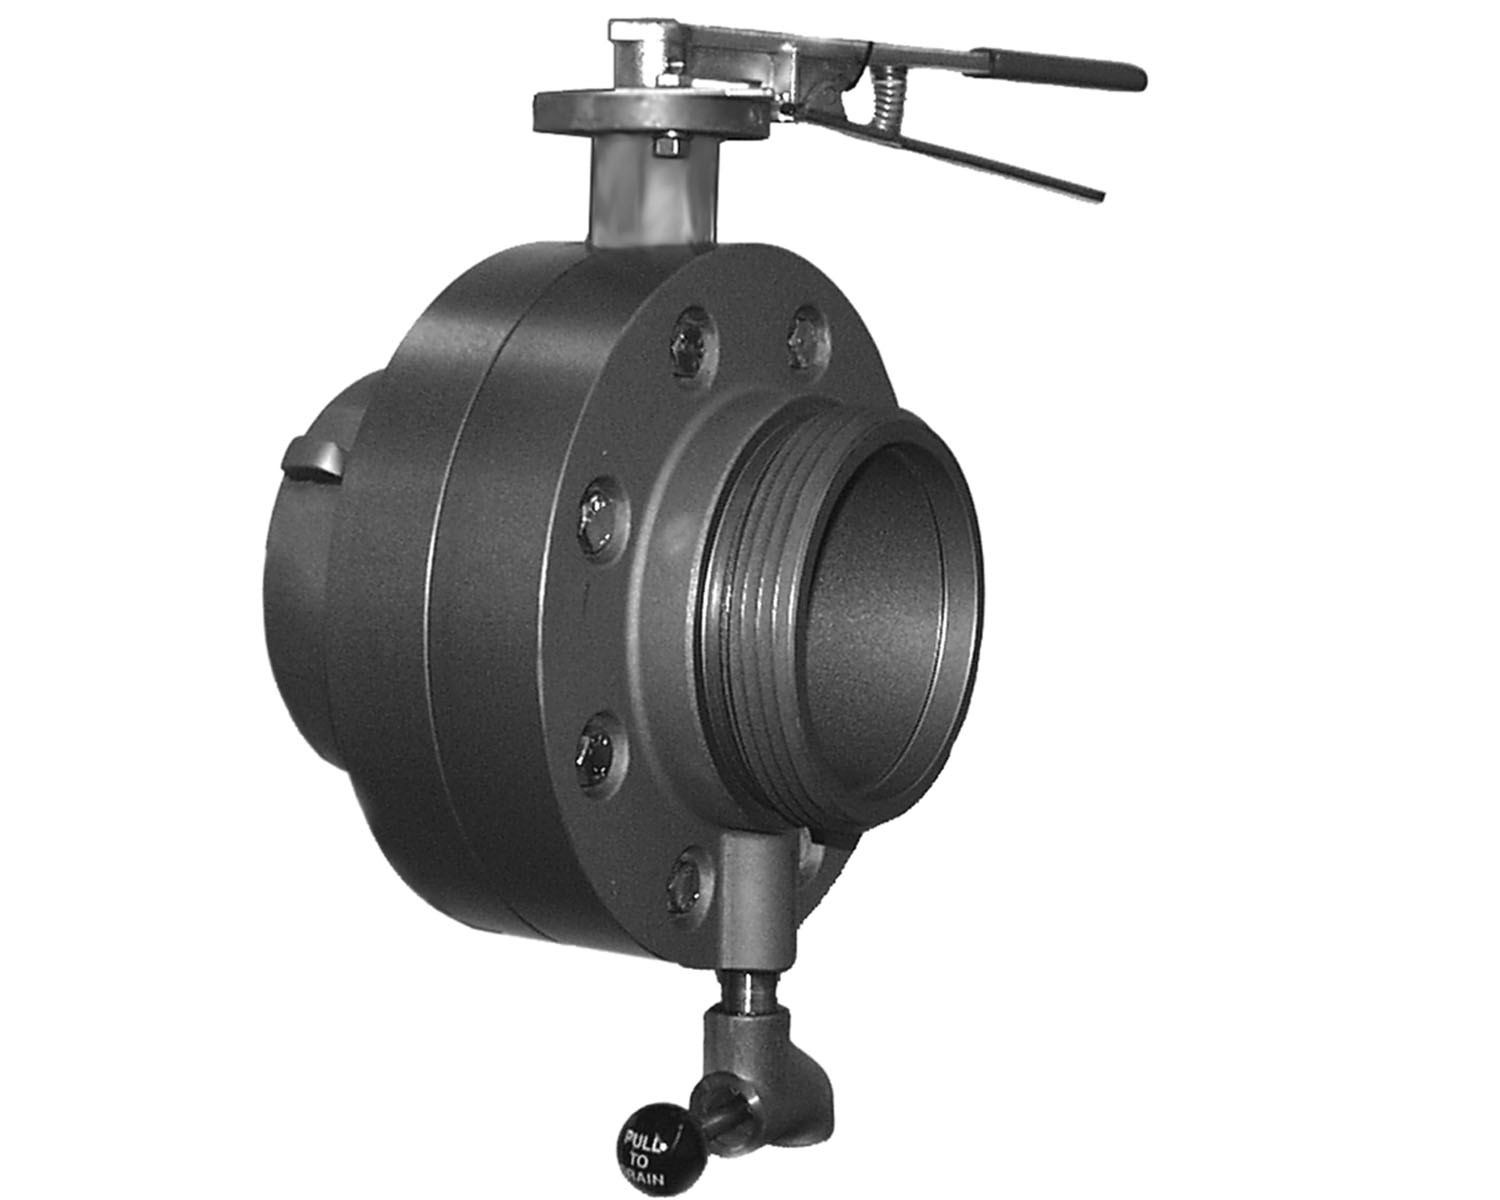 BV78, 5 NS Rockerlug Swivel X 5 NS Male 5 Butterfly Valve Hard Coated,with Chrome Plated Lever Handle